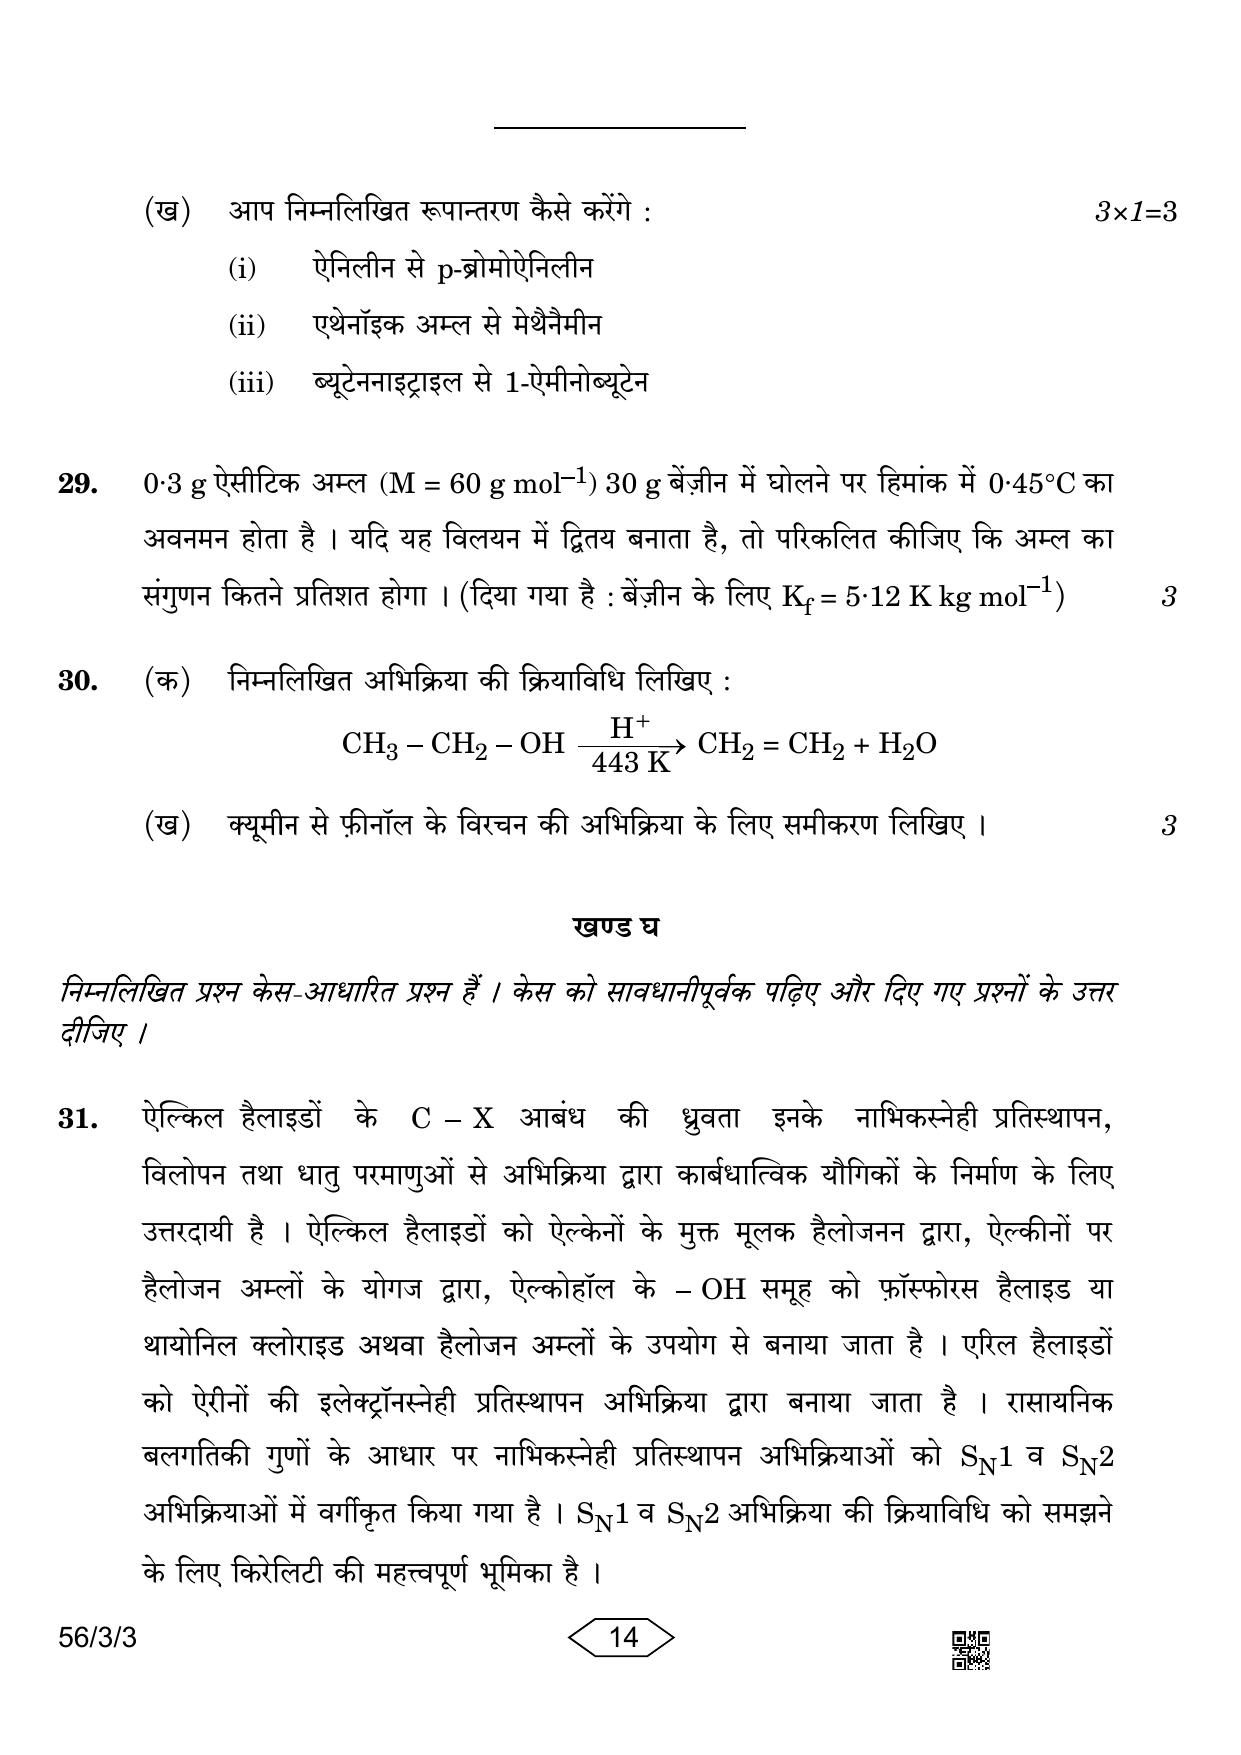 CBSE Class 12 56-3-3 Chemistry 2023 Question Paper - Page 14